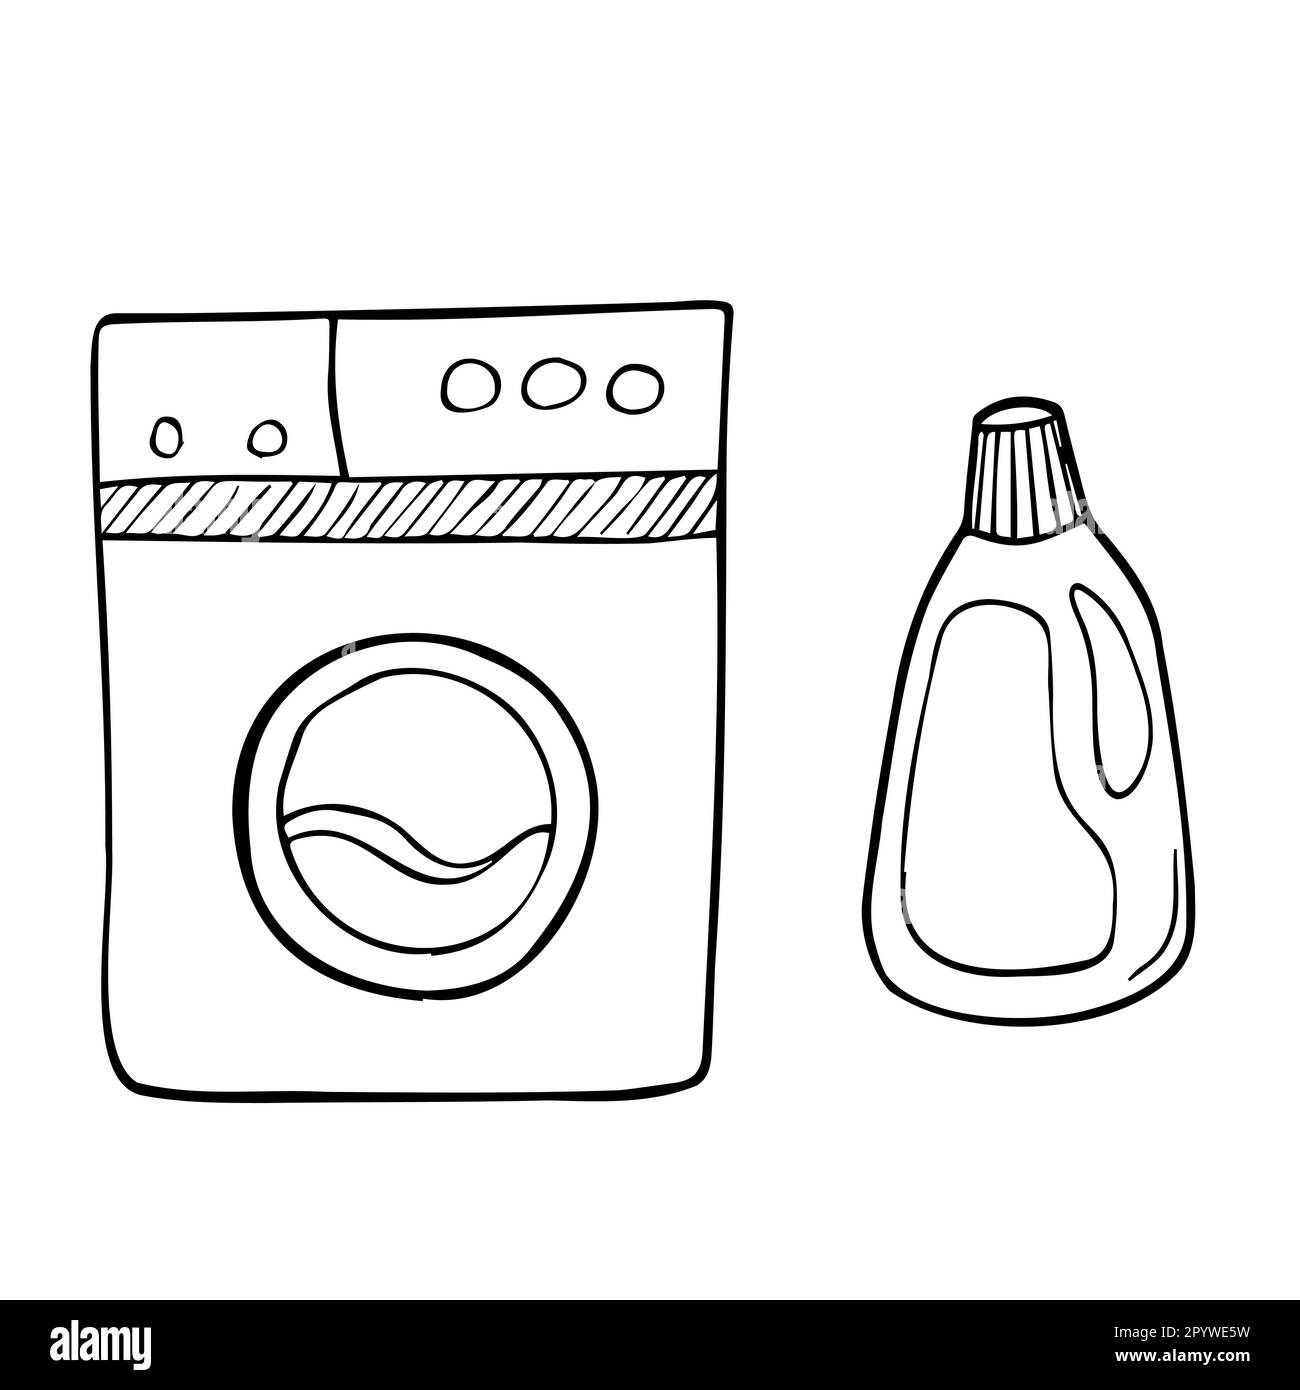 Composition with hand drawn laundry icons. Collection of sketched objects. Home laundry service. Accessories for washing Stock Vector